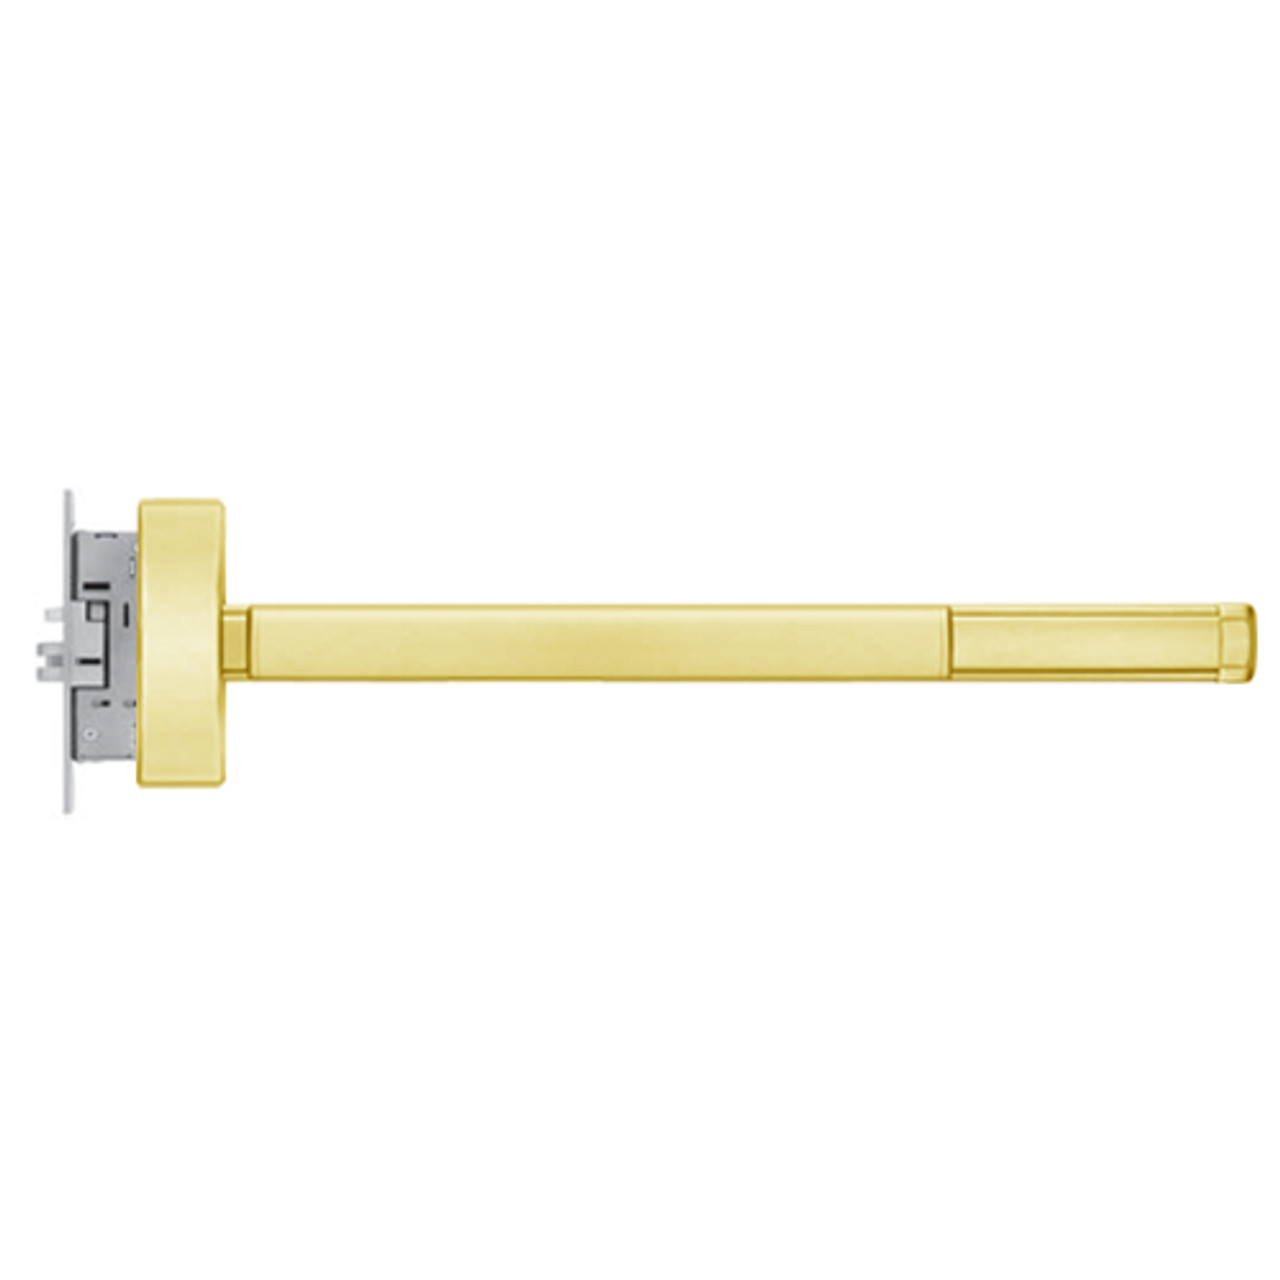 MLR2305-LHR-605-48 PHI 2300 Series Apex Mortise Exit Device with Motorized Latch Retraction Prepped for Key Controls Thumb Piece in Bright Brass Finish